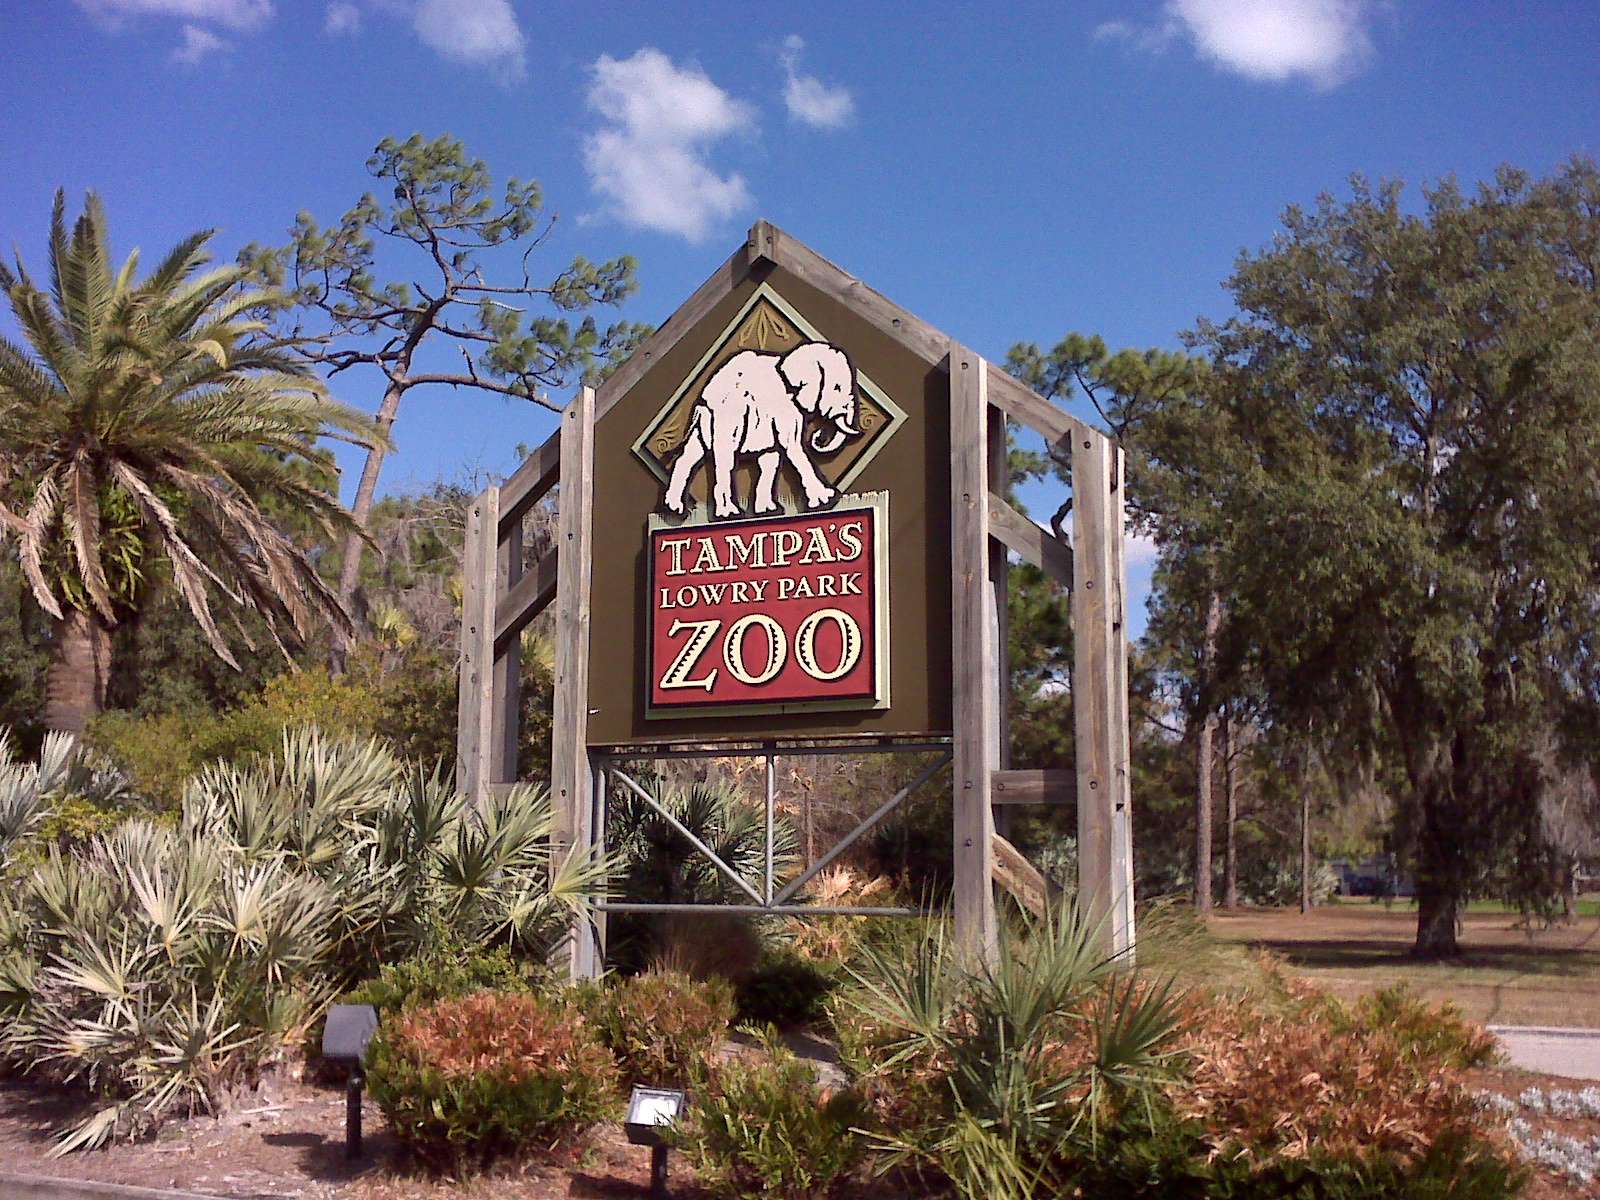 17-surprising-facts-about-tampas-lowry-park-zoo